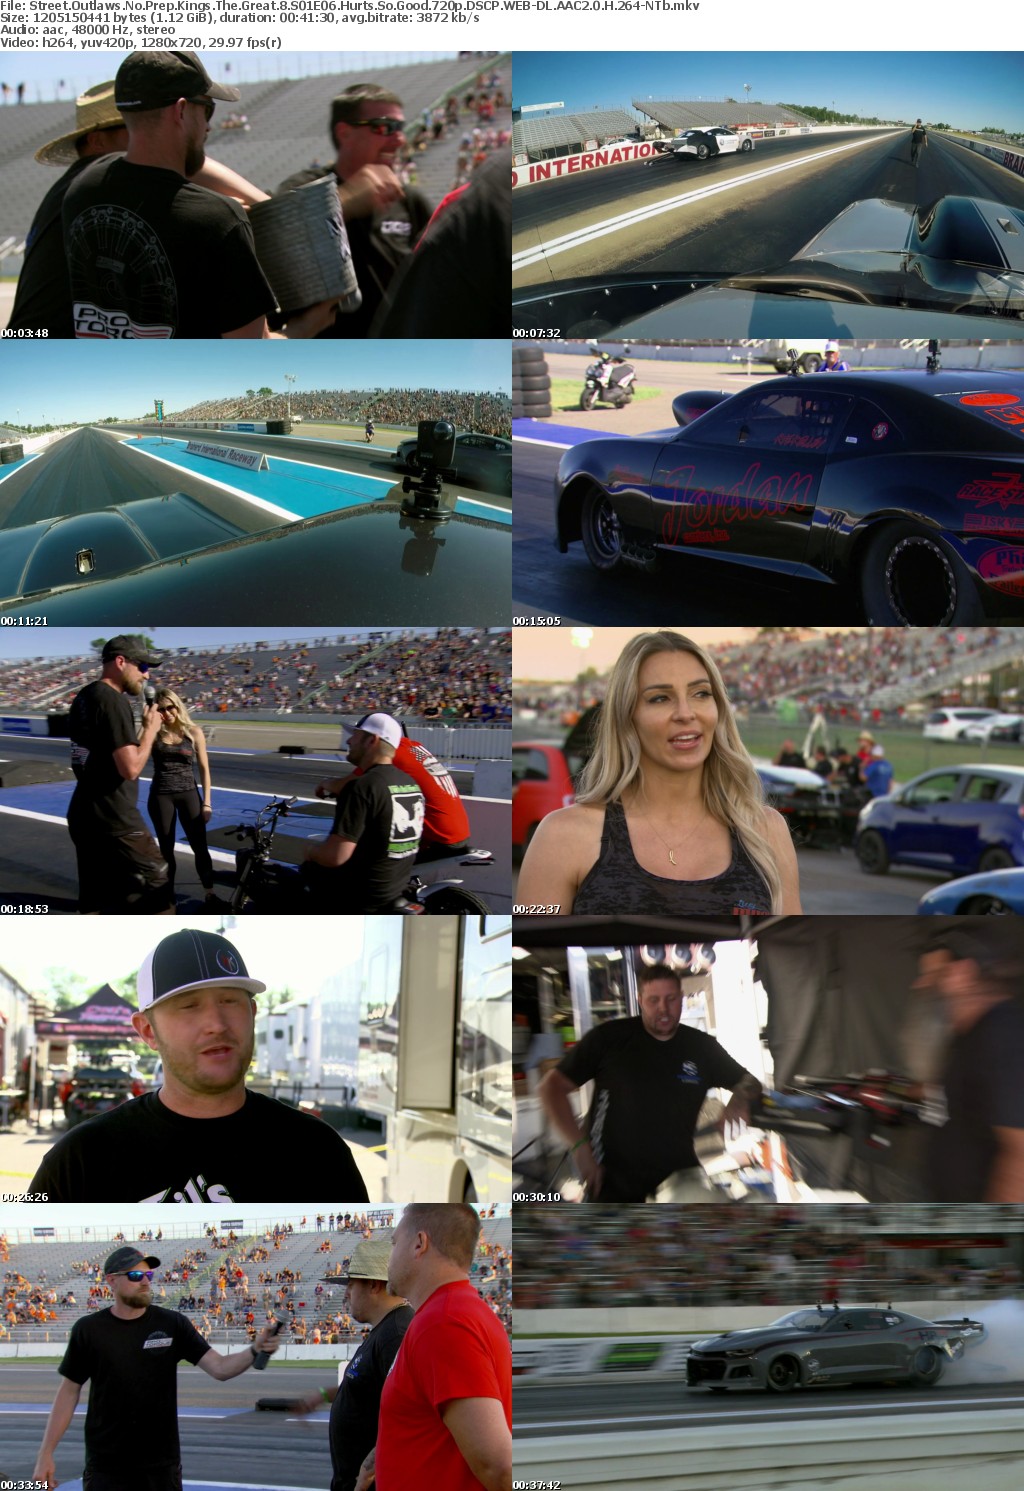 Street Outlaws No Prep Kings The Great 8 S01E06 Hurts So Good 720p DSCP WEB-DL AAC2 0 H 264-NTb